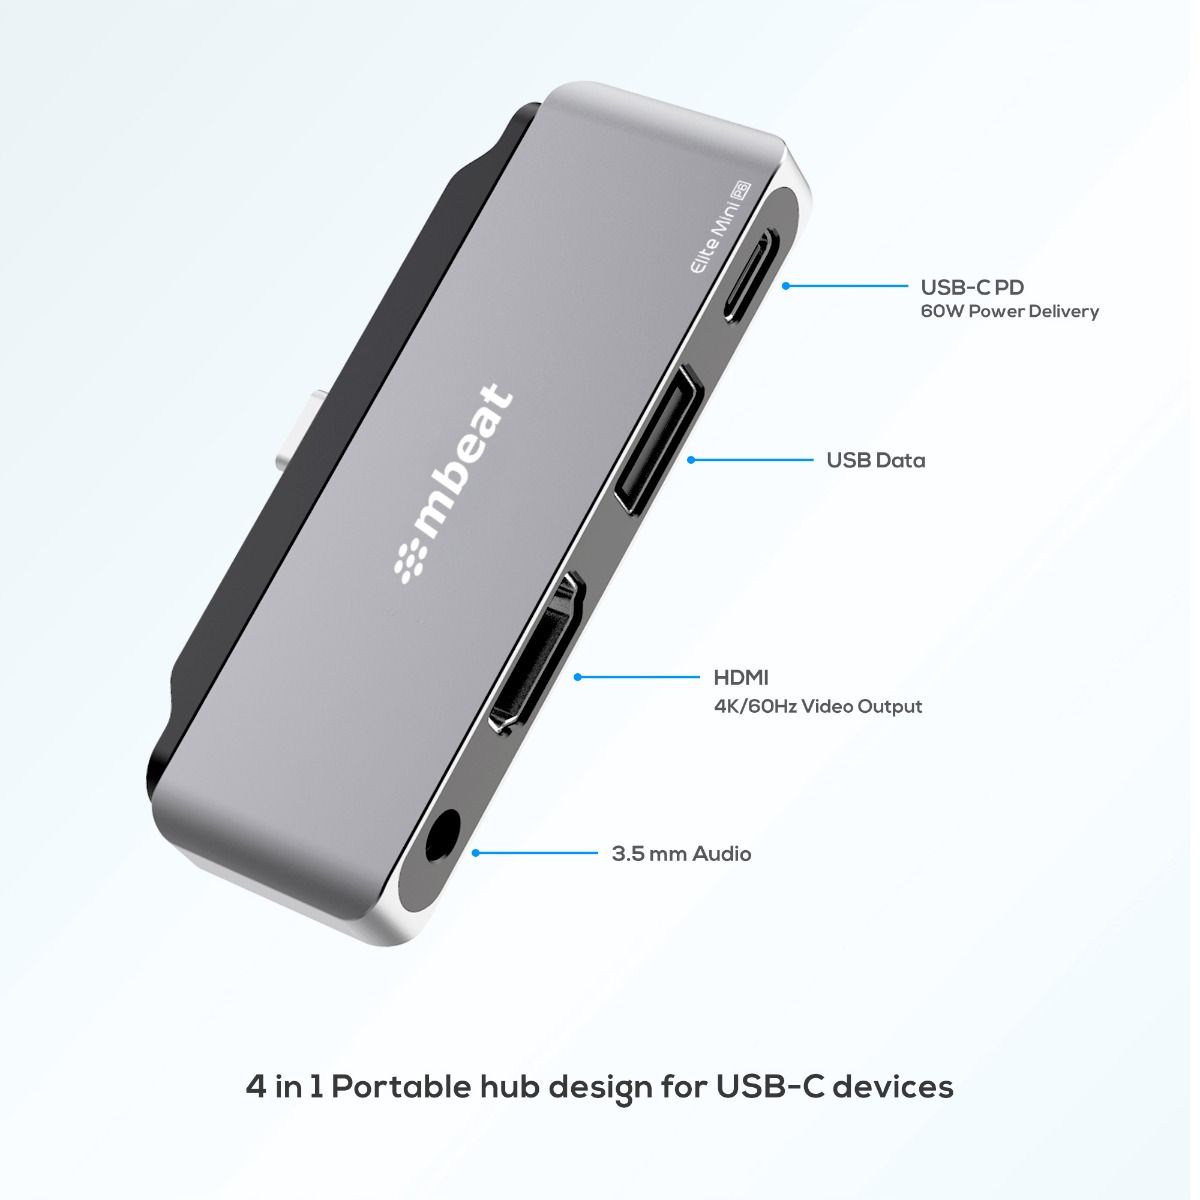 A large marketing image providing additional information about the product mBeat Elite Mini 4-in-1 USB-C Mobile Hub For IPad Pro - Additional alt info not provided